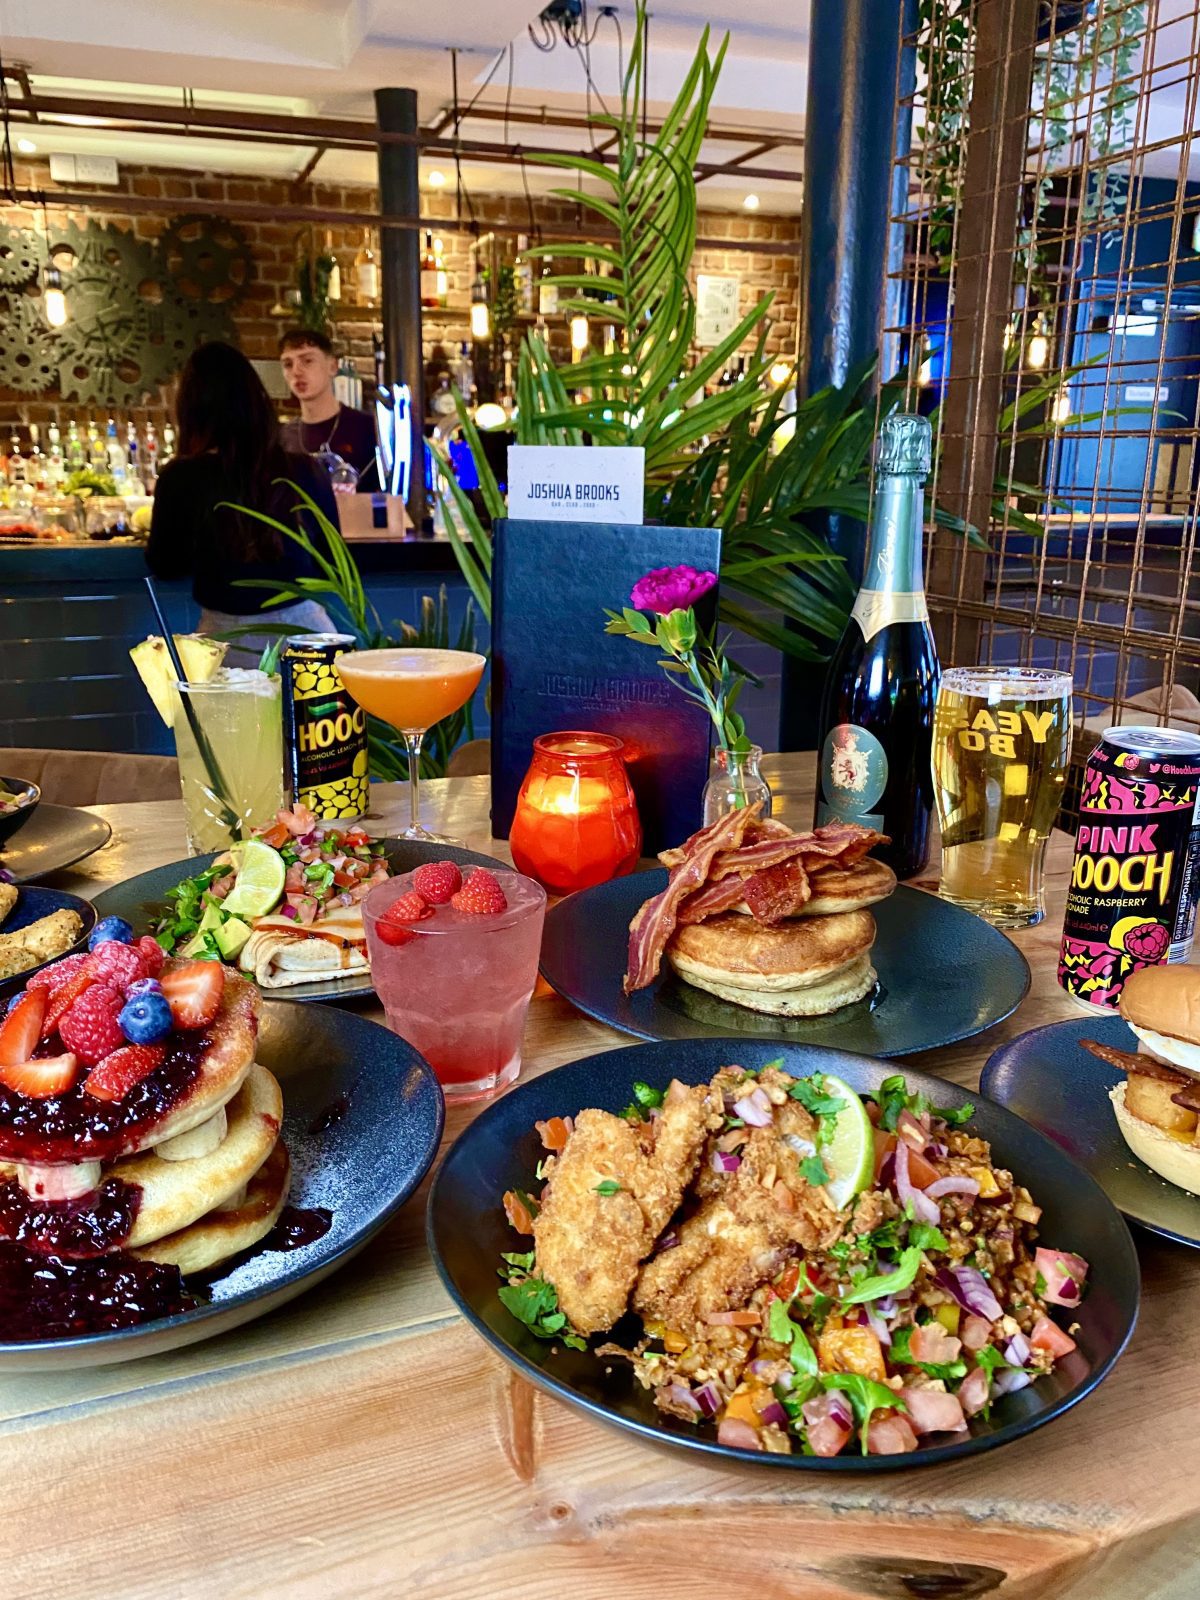 The bottomless Manchester brunch with non-stop Hooch, pornstar martinis and pina coladas, The Manc